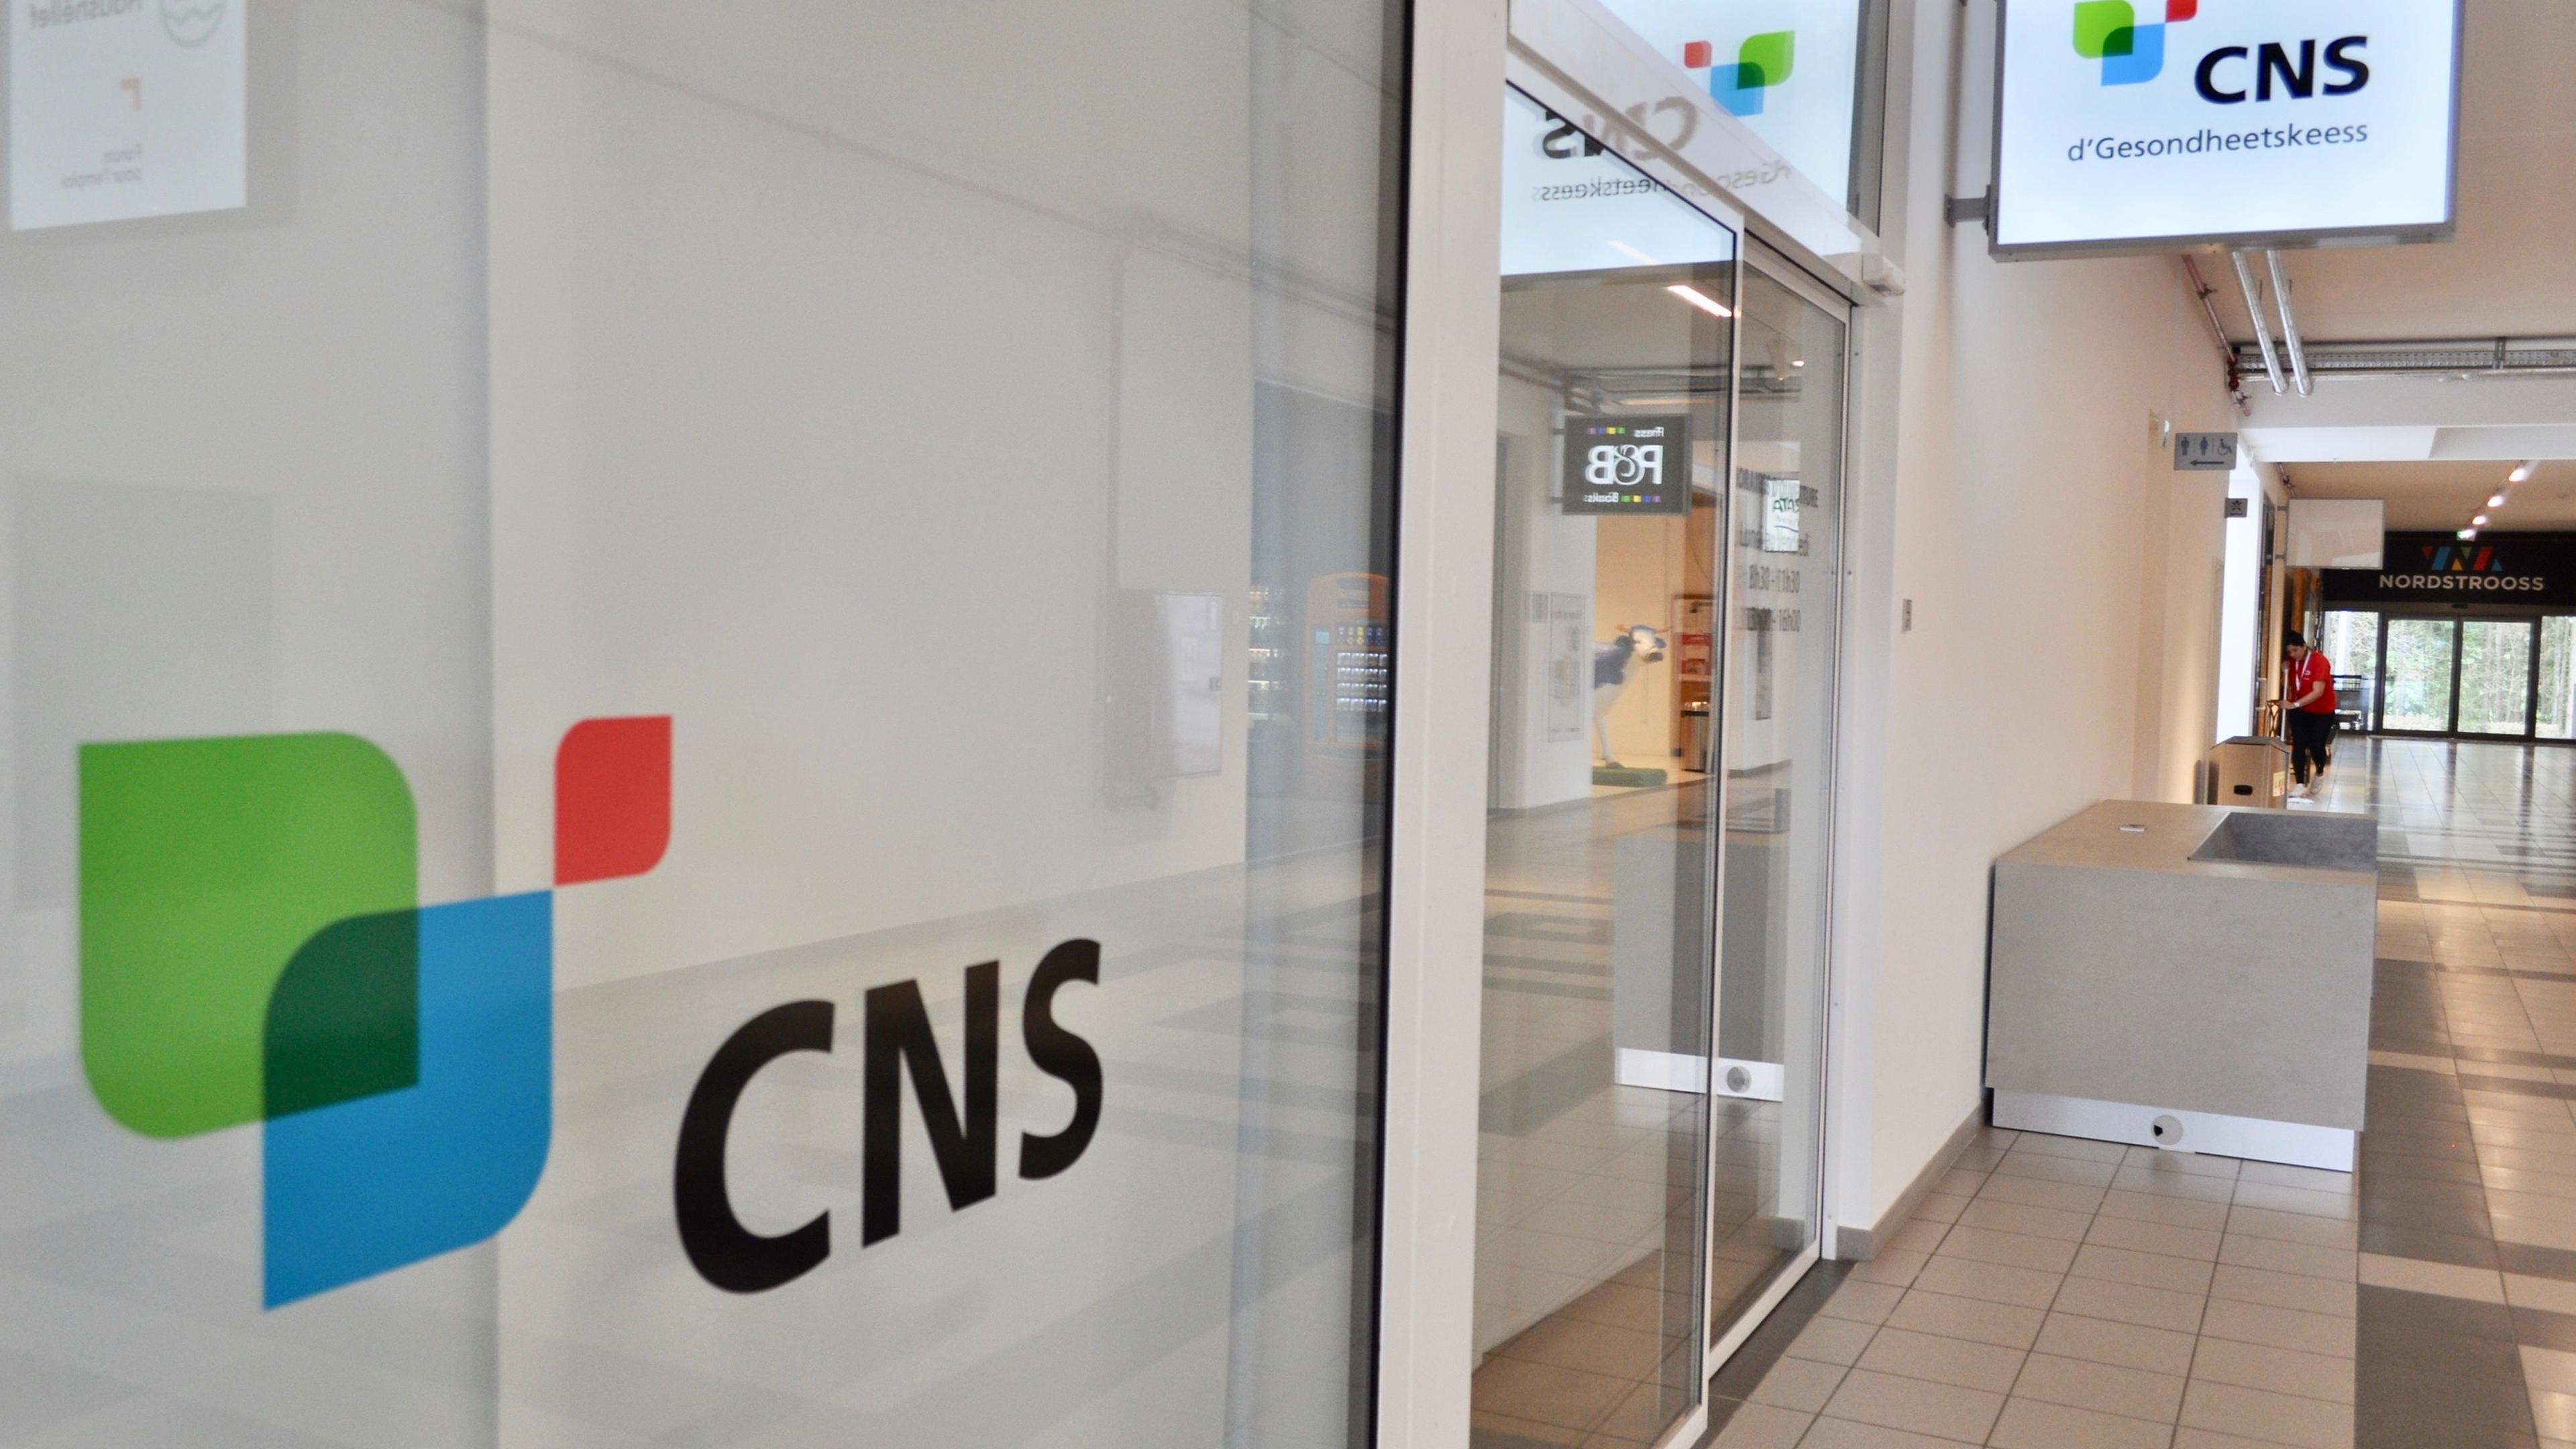 Luxembourg's national health insurance fund, the CNS, has seen an increasing number of visitors calling to offices seeking repayment of medical bills